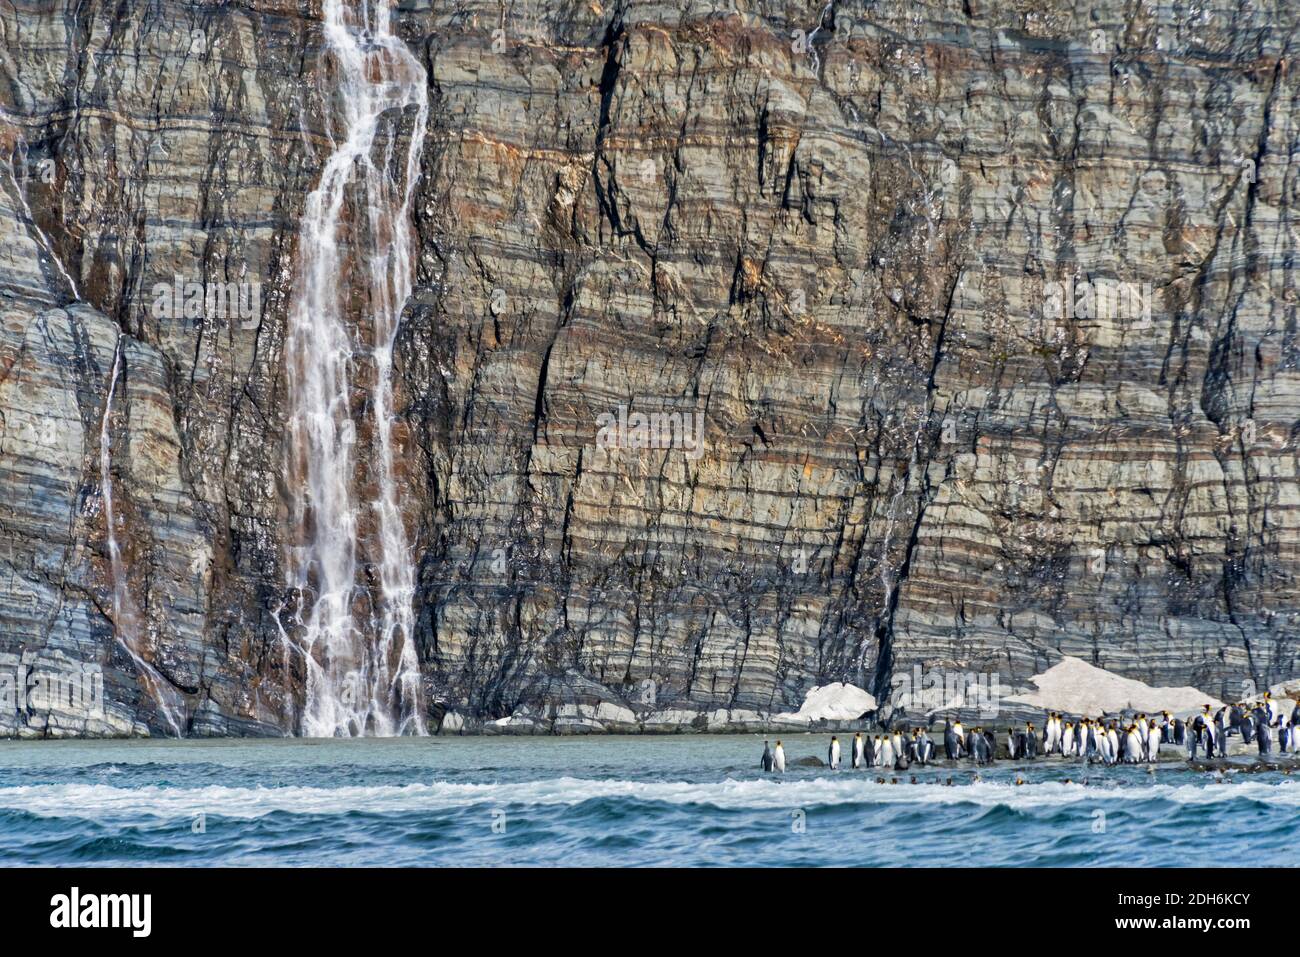 King penguins on the beach with waterfall, Gold Harbor, South Georgia Island Stock Photo